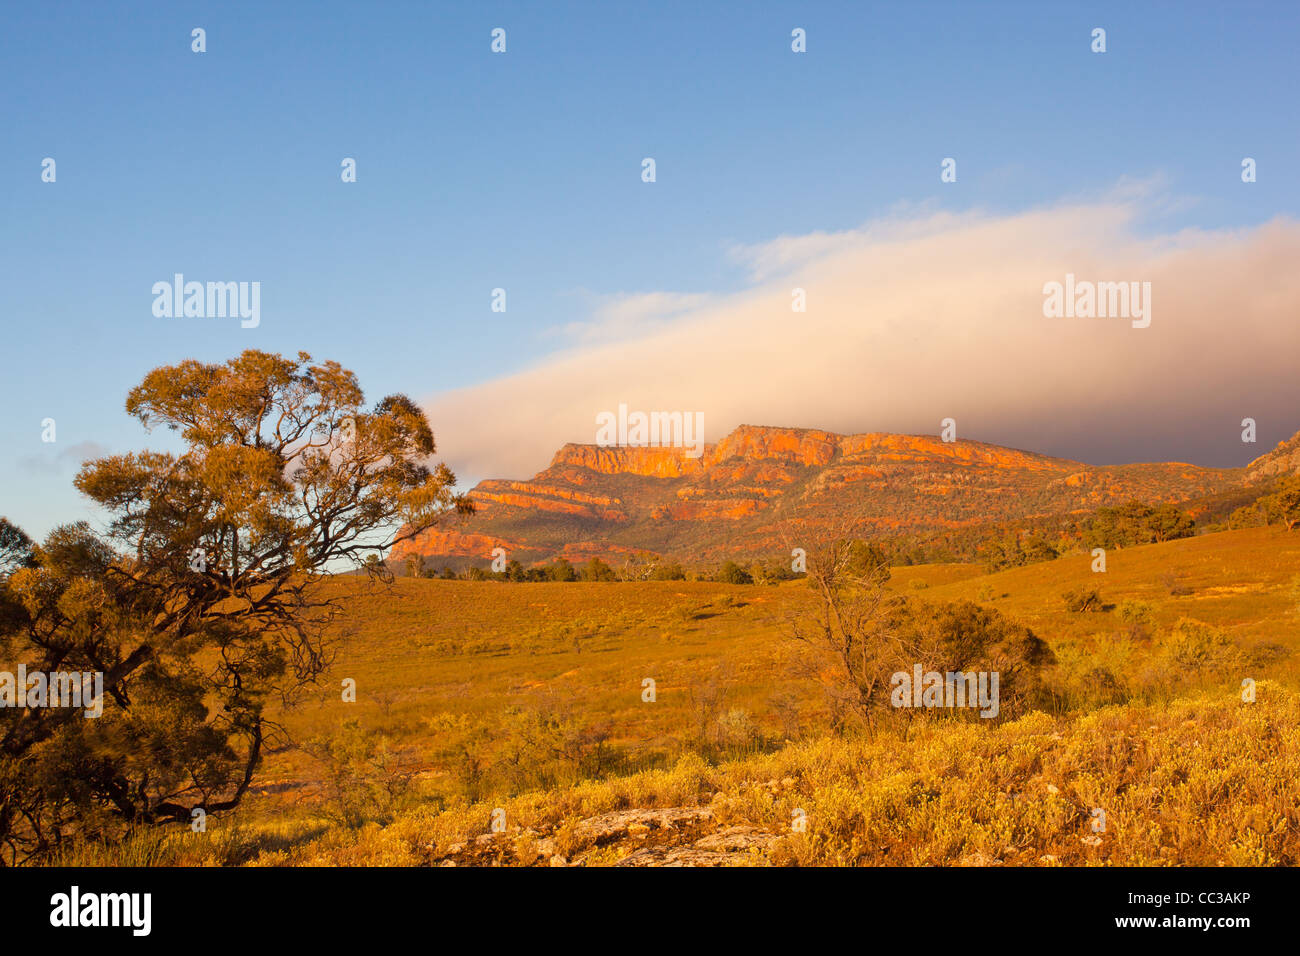 Early morning view of Rawnsley Bluff and Wilpena Pound in the Flinders Ranges in outback South Australia, Australia Stock Photo